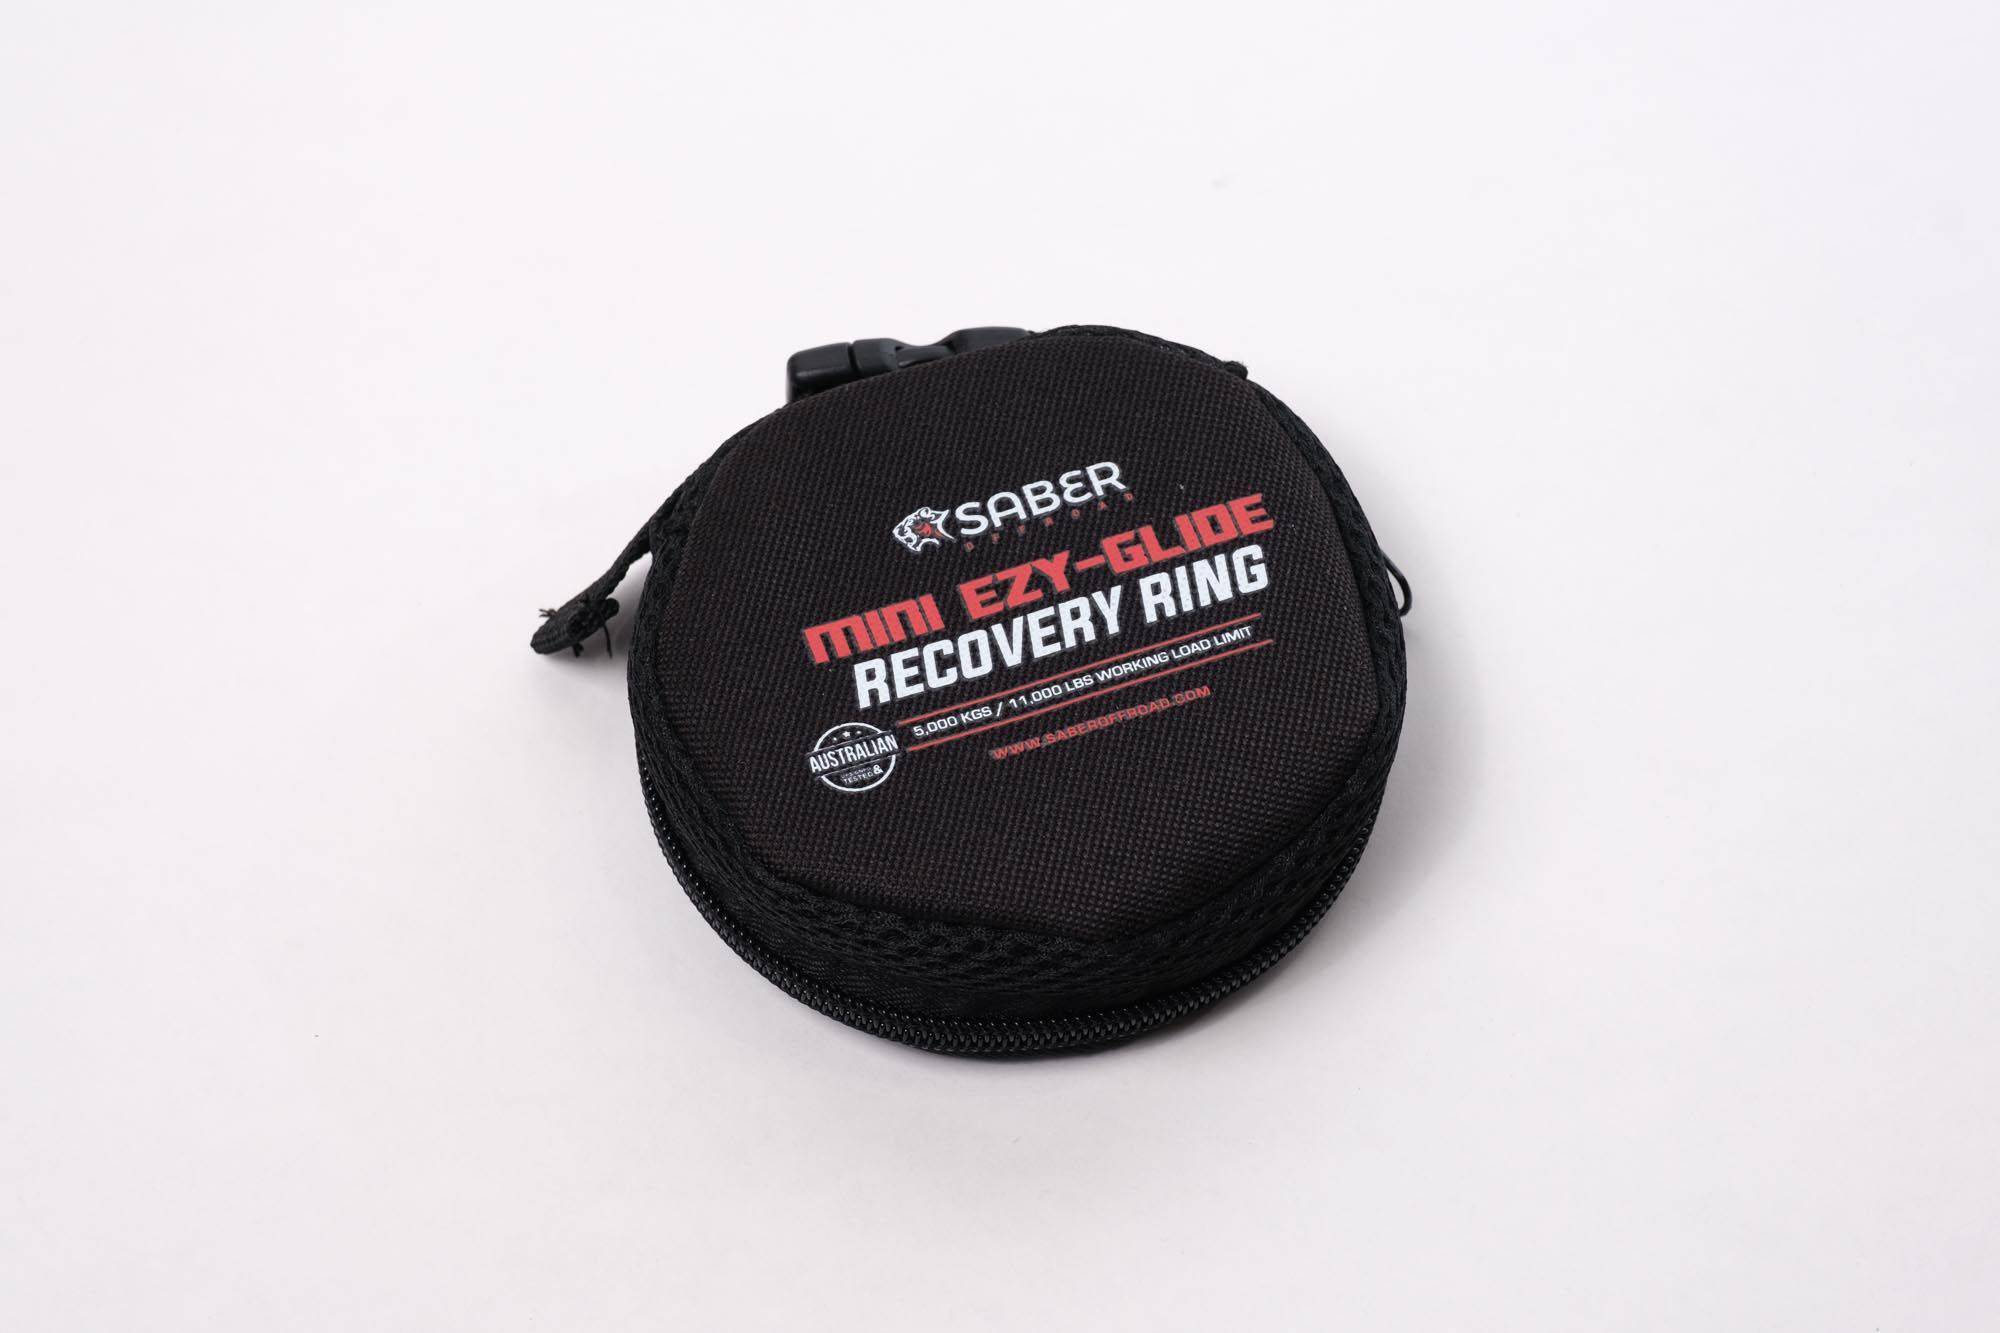 Saber Offroad Mini Ezy-Glide 5,000 WLL Recovery Ring & Bag | Saber Offroad